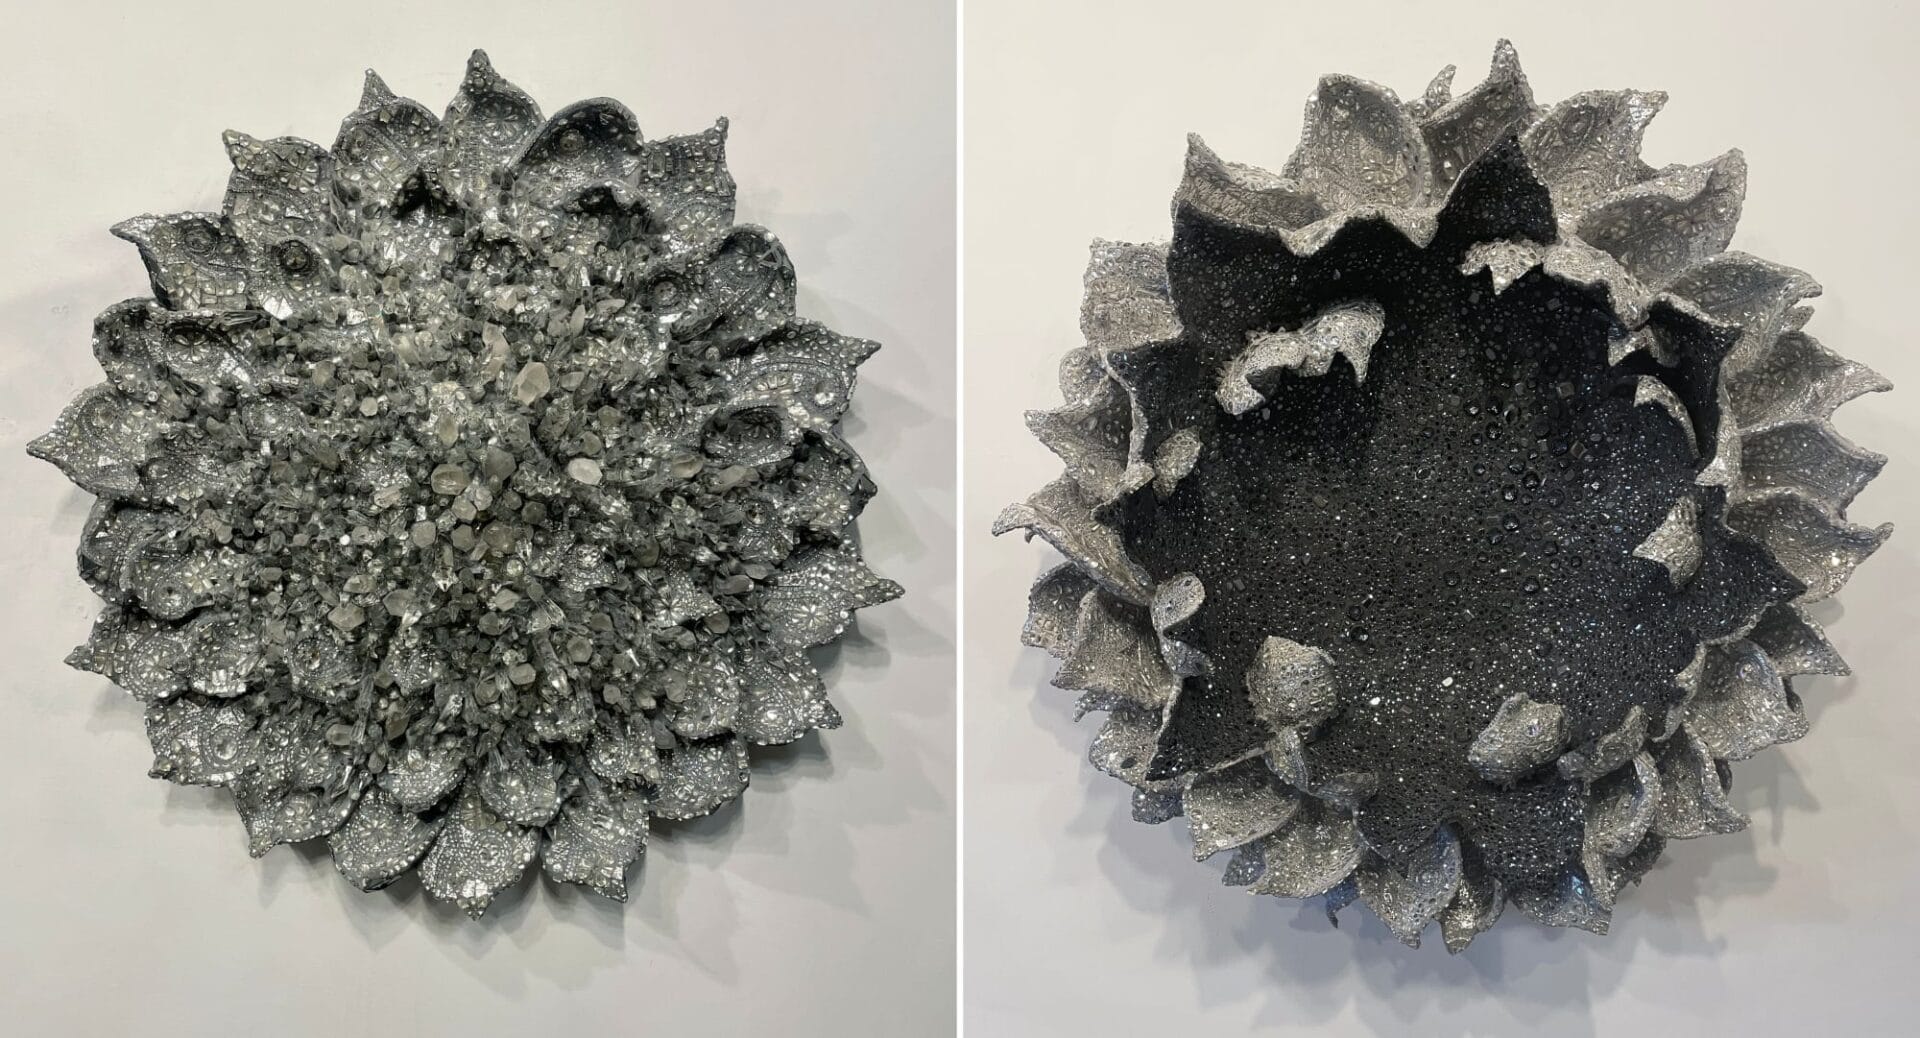 left: a floral sculpture with numerous leaves all covered in glimerring stones and crystals. right: a floral wall sculpture with black glimmering stones in the center and silver petals